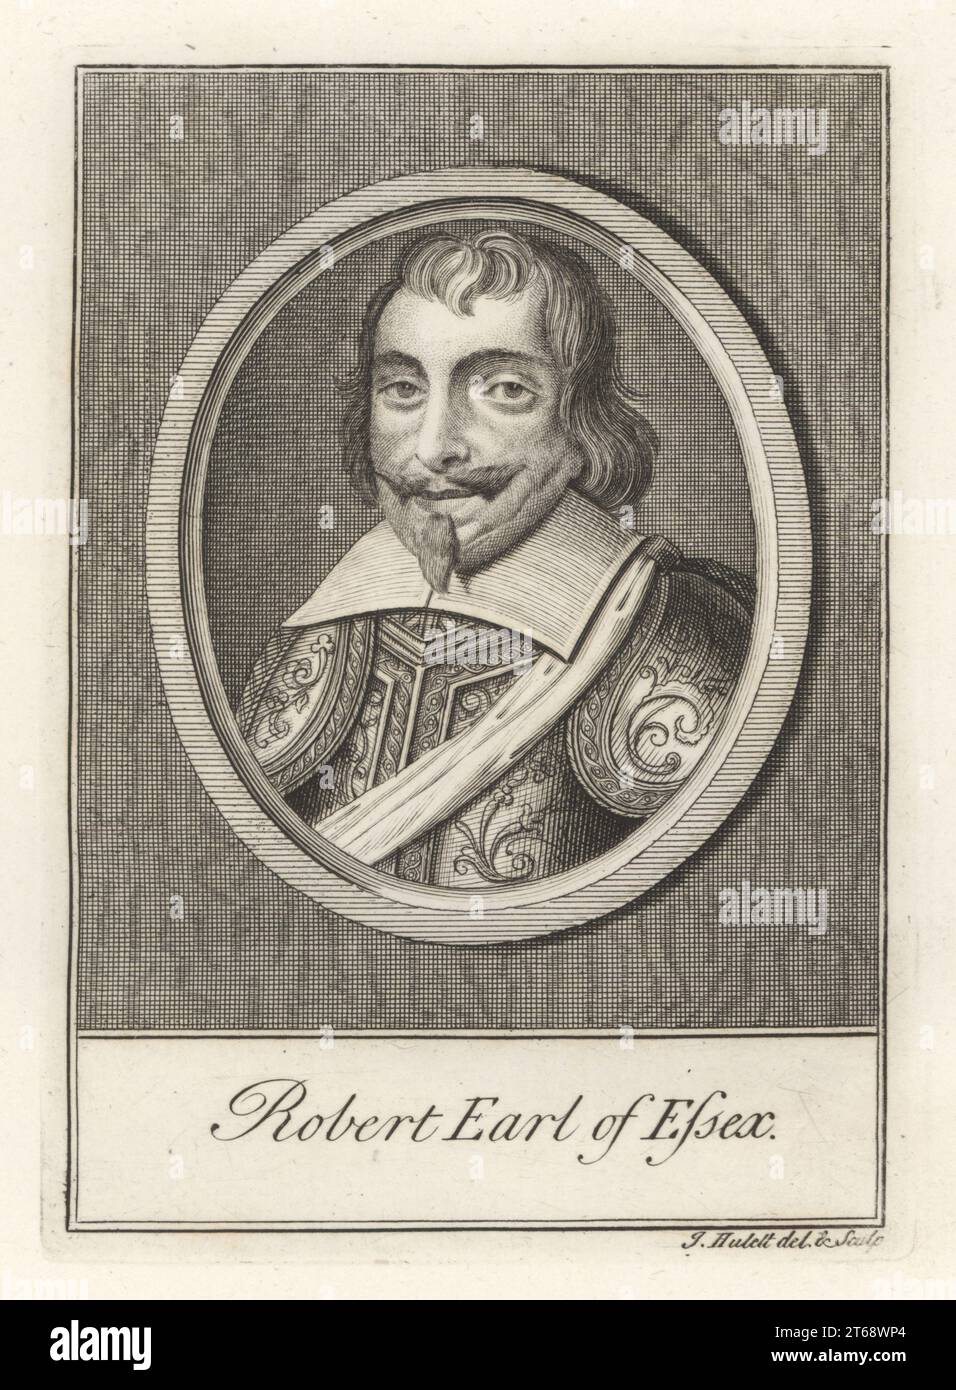 Robert Devereux, 3rd Earl of Essex, Parliamentary general, 1591-1646. Bareheaded with goatee beard, engraved breastplate and shoulder armour, collar and sash. Drawn and engraved by James Hulett. Copperplate engraving from Samuel Woodburns Gallery of Rare Portraits Consisting of Original Plates, George Jones, 102 St Martins Lane, London, 1816. Stock Photo